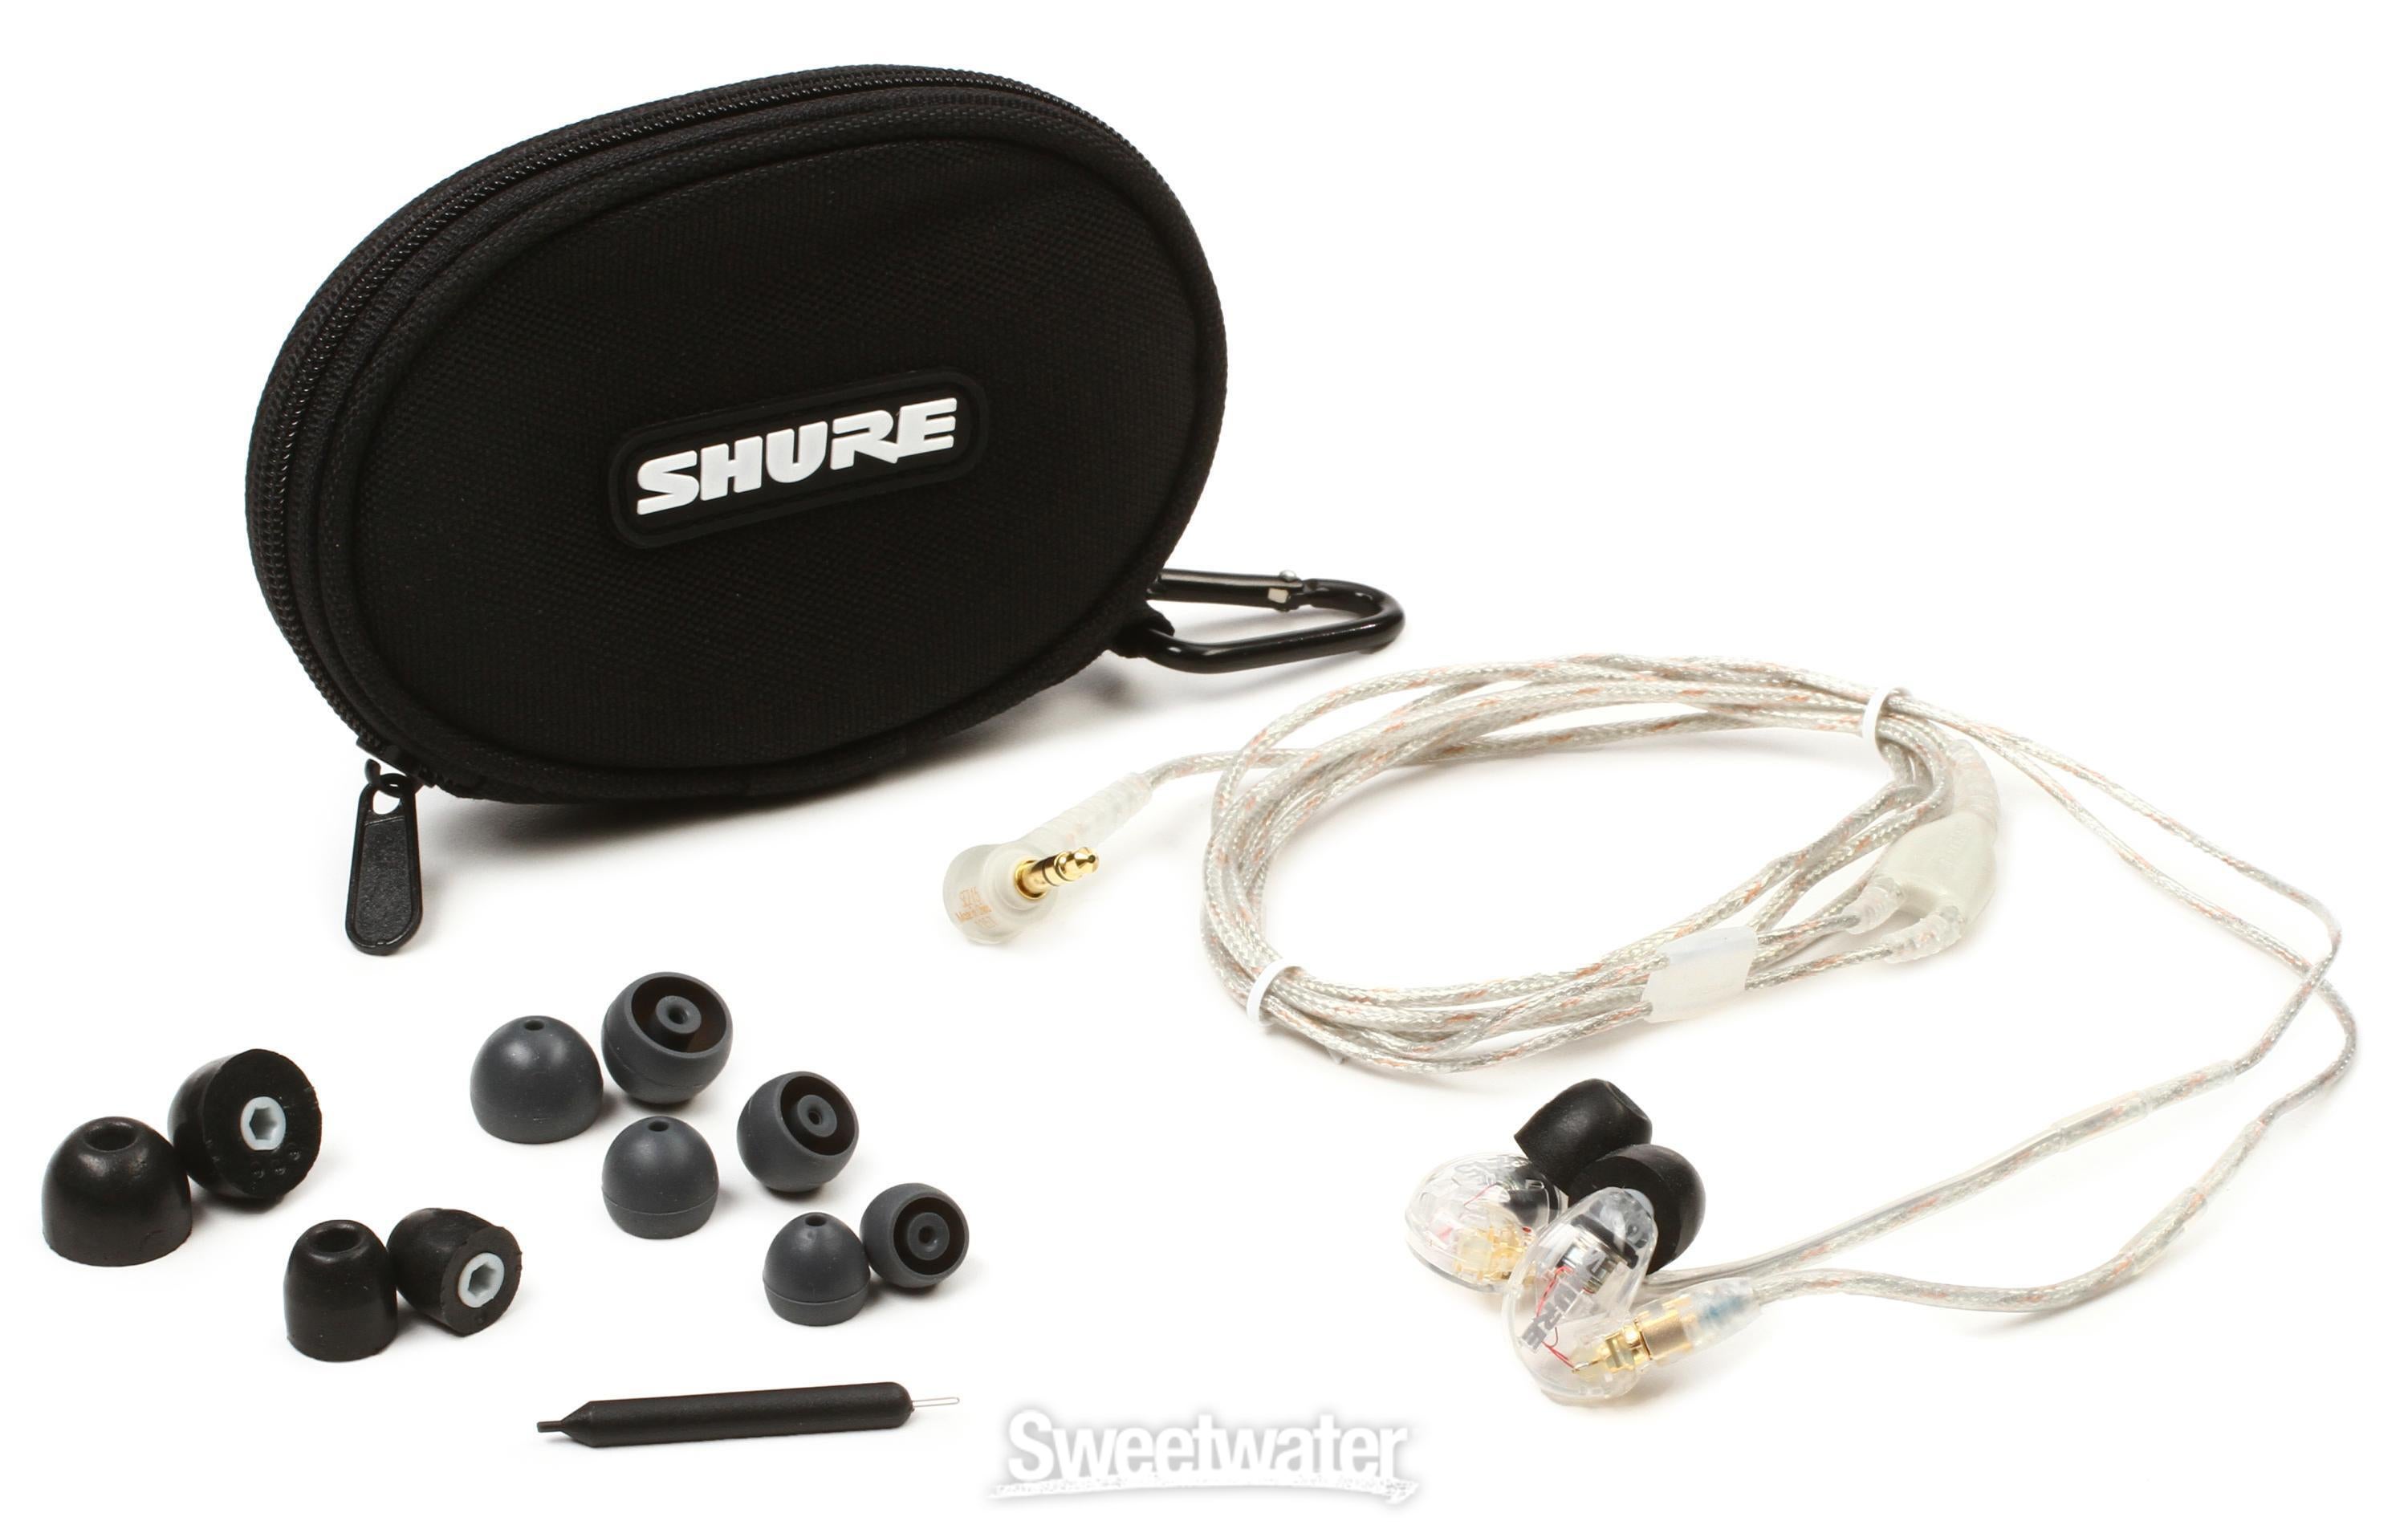 Shure SE215-CL Sound-isolating Earphones - Clear | Sweetwater